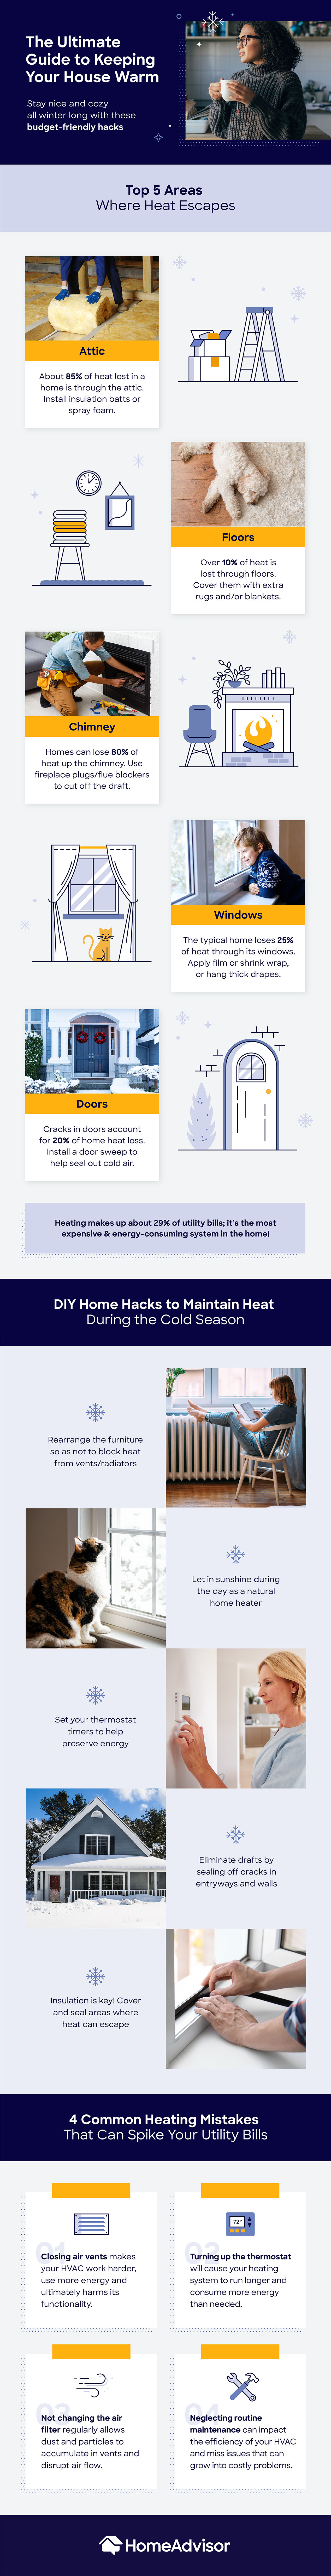 The Ultimate Guide to Keeping Your House Warm